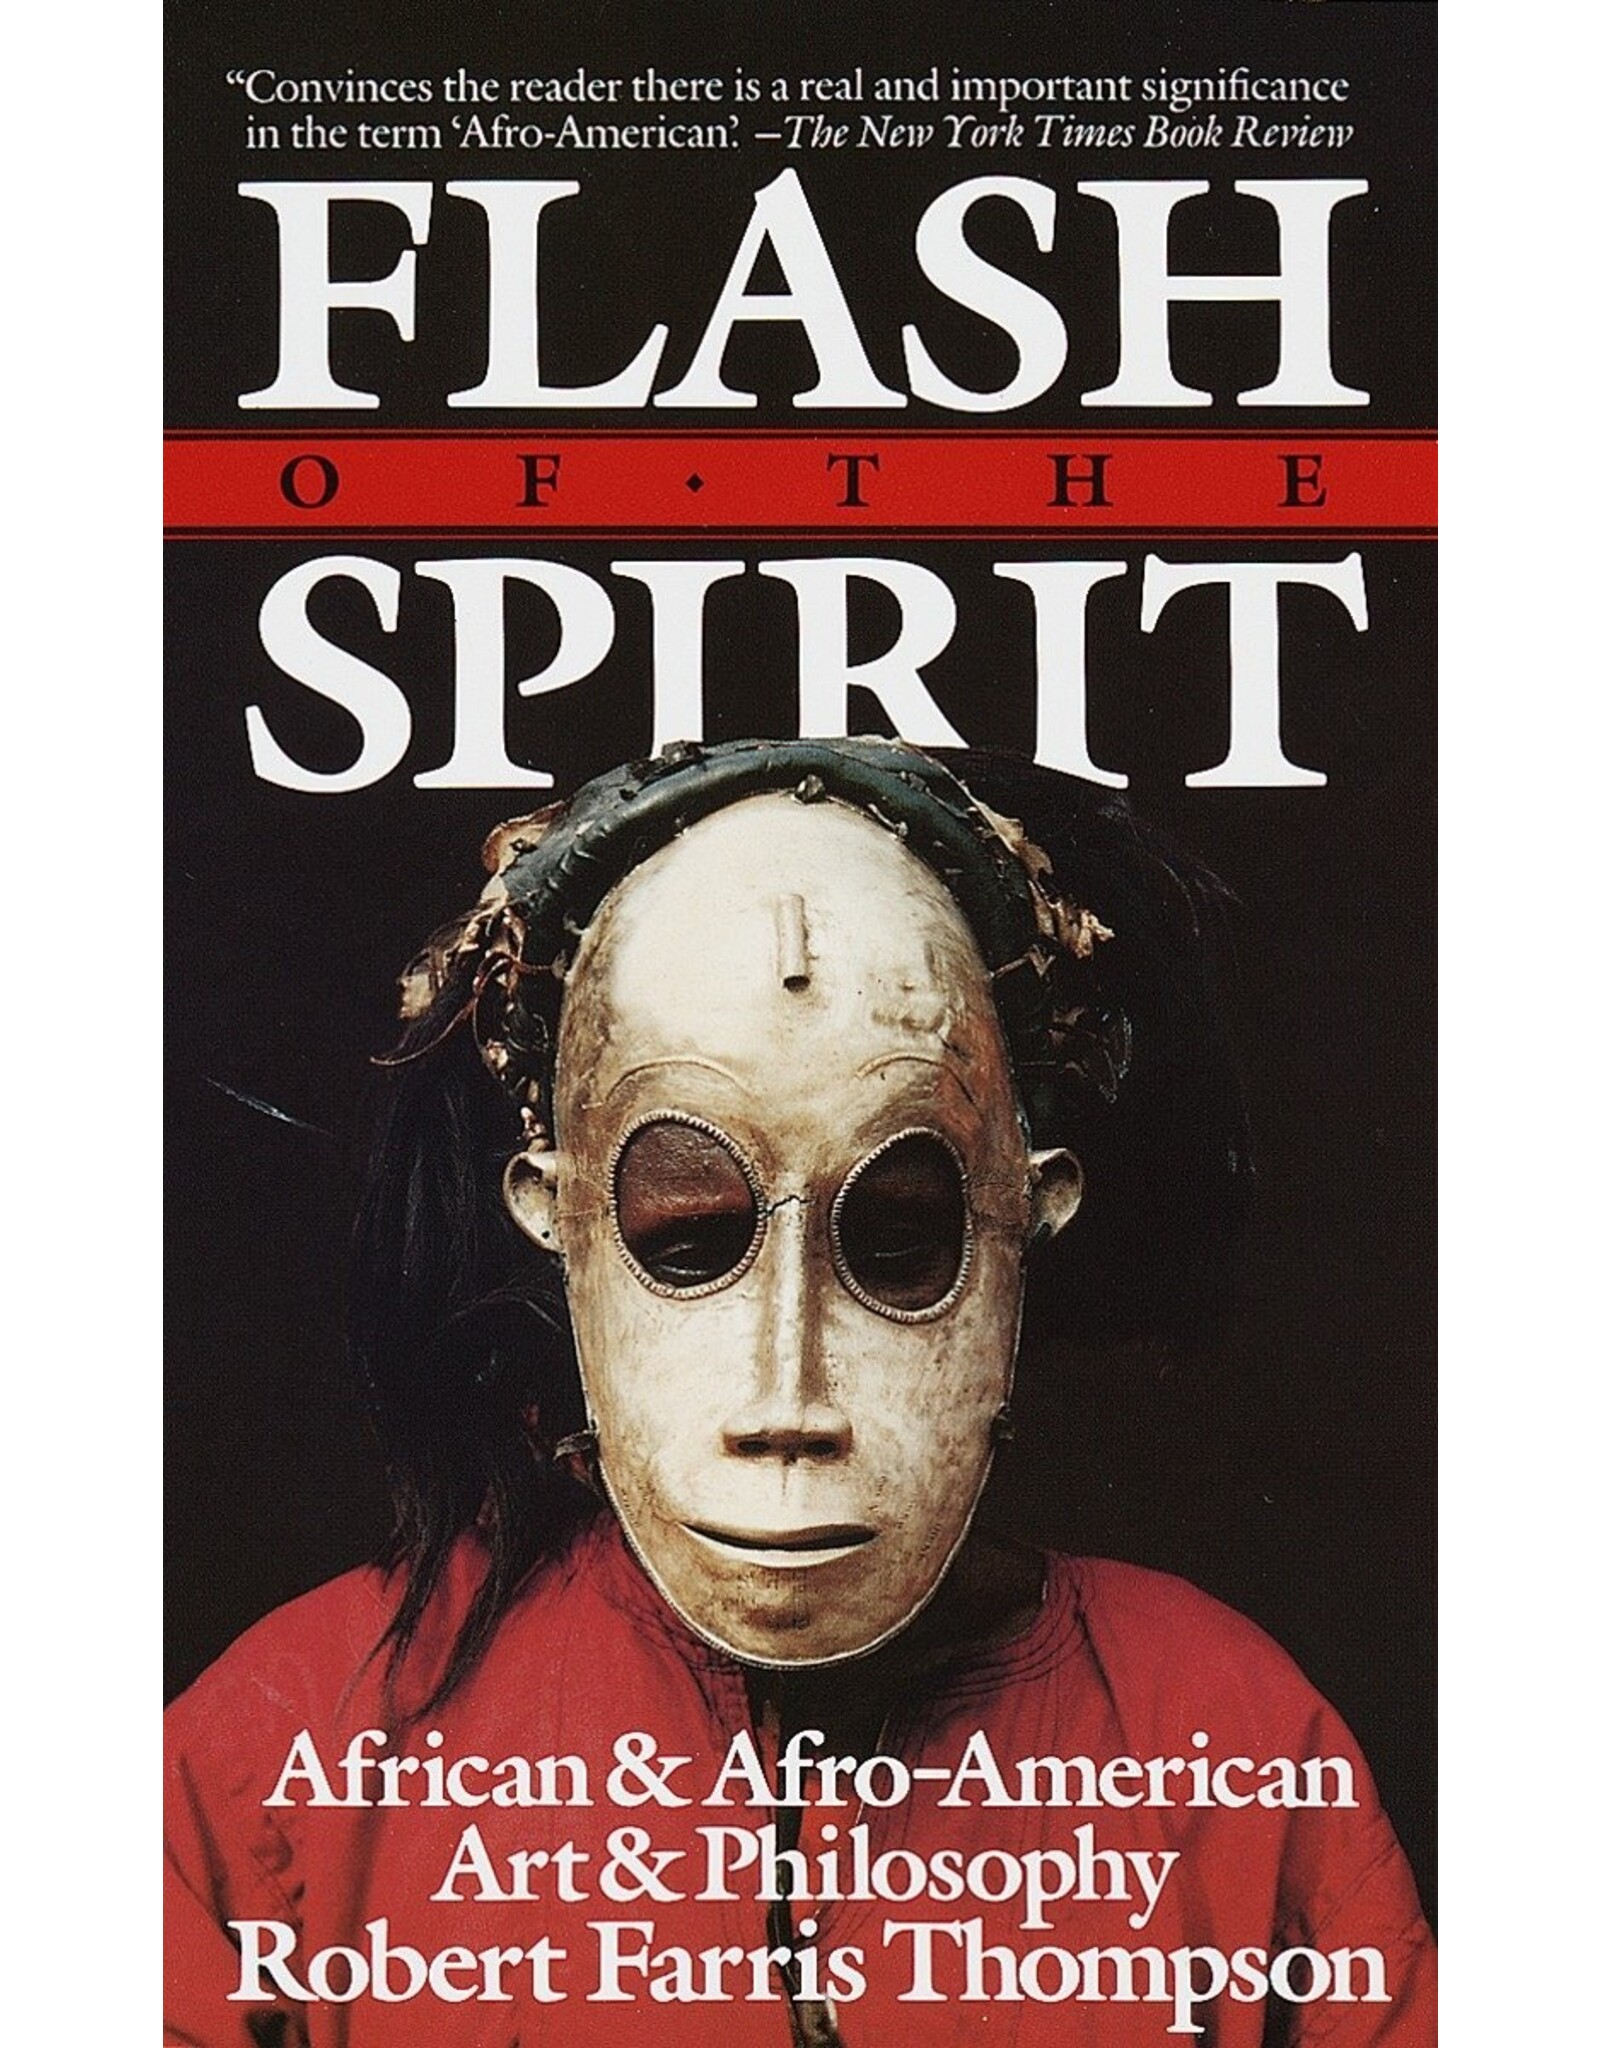 African History & Culture Flash of the Spirit: African & Afro-American Art & Philosophy